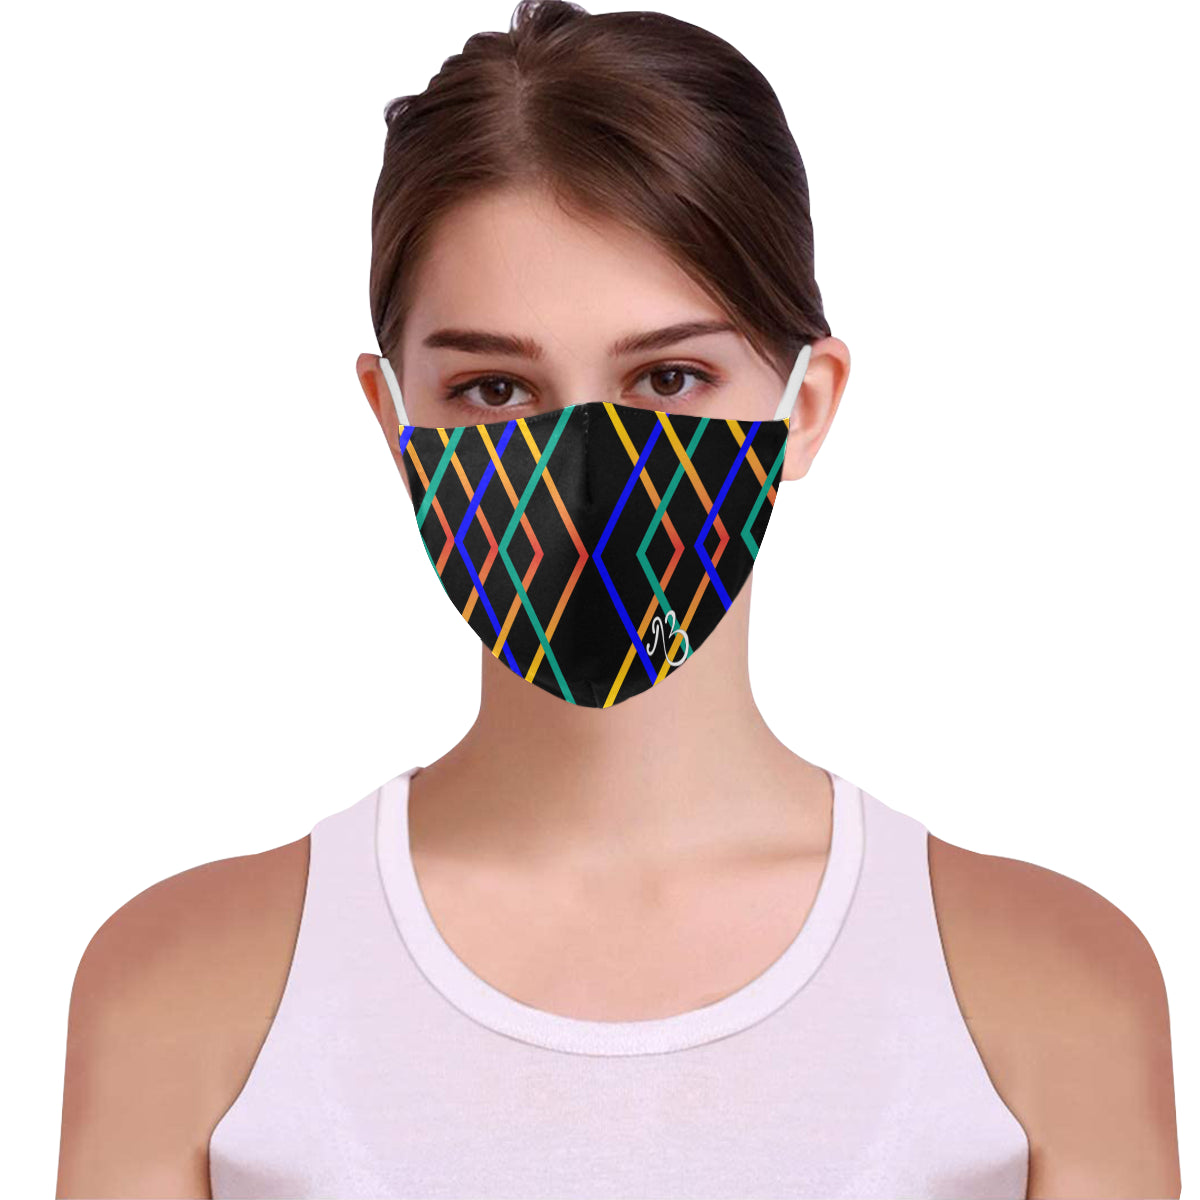 Constellation Print Cotton Fabric Face Mask with Filter Slot & Adjustable Strap (Pack of 5) - Non-medical use